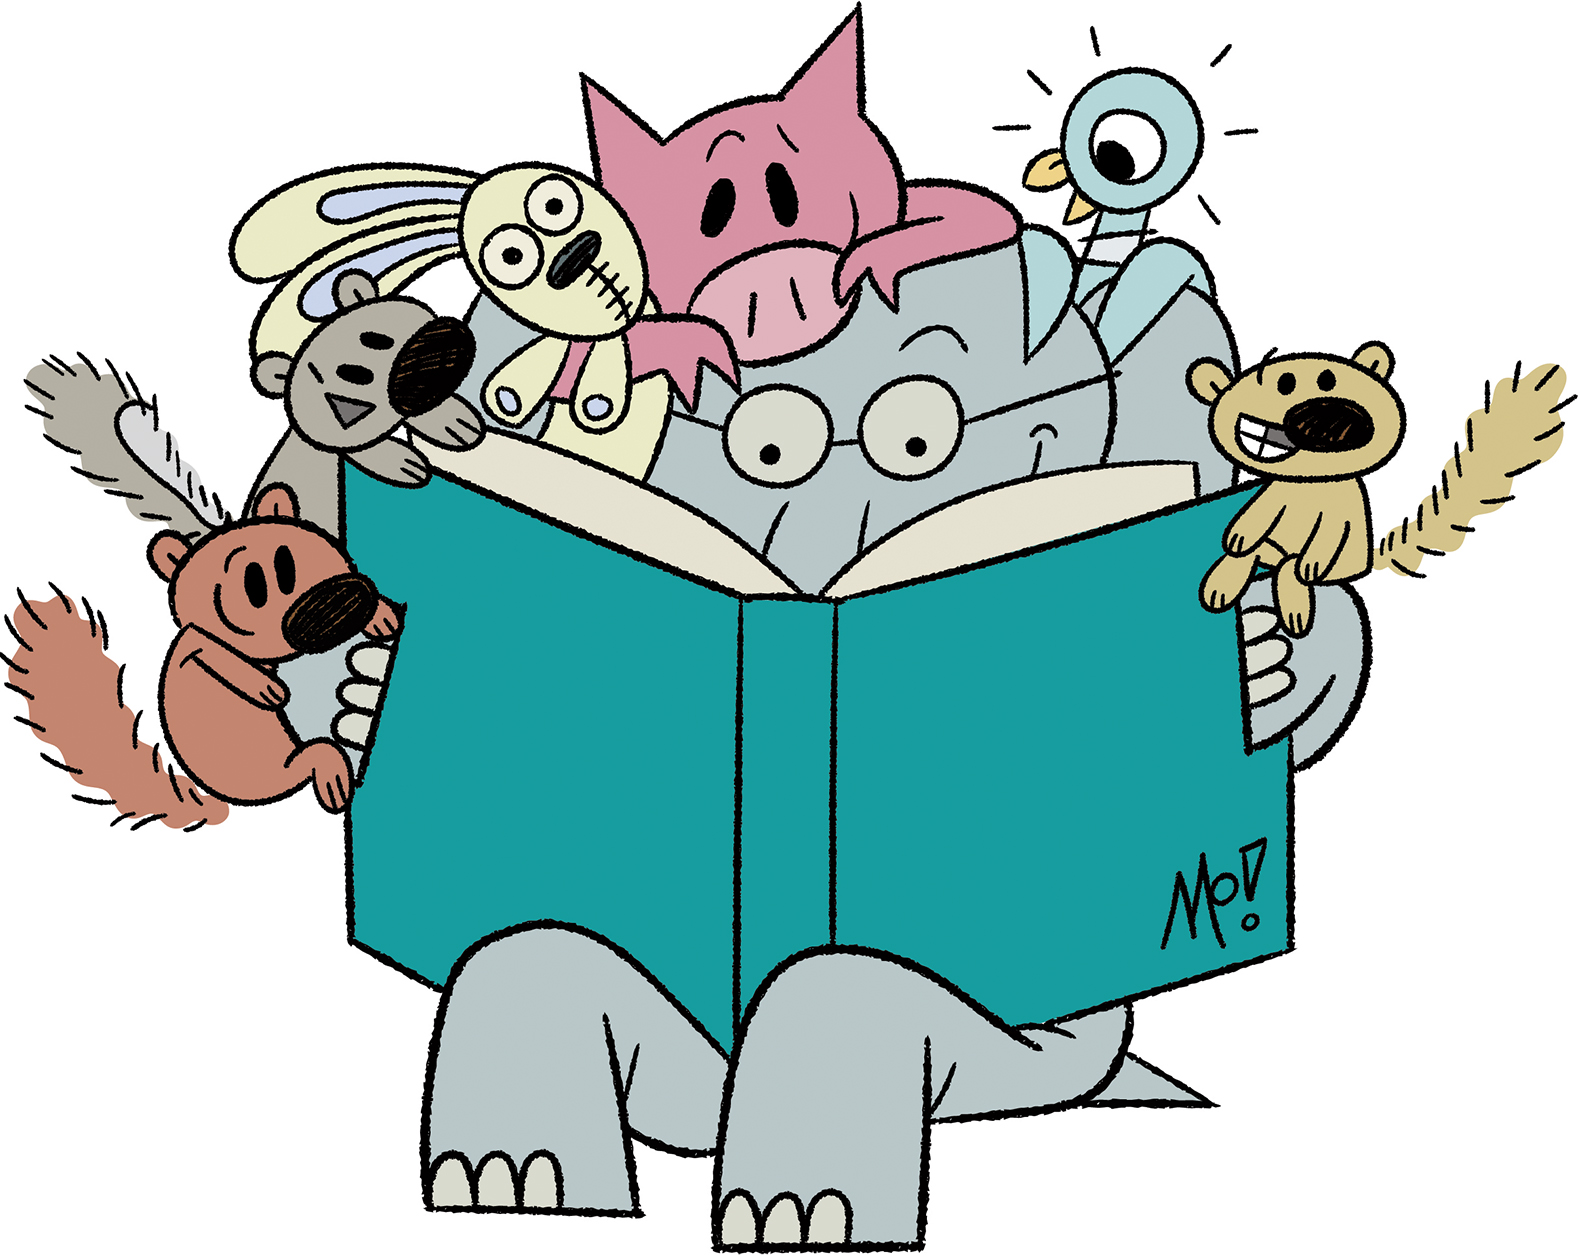 Mo Willems on the Lost Art of Being Silly | Edutopia